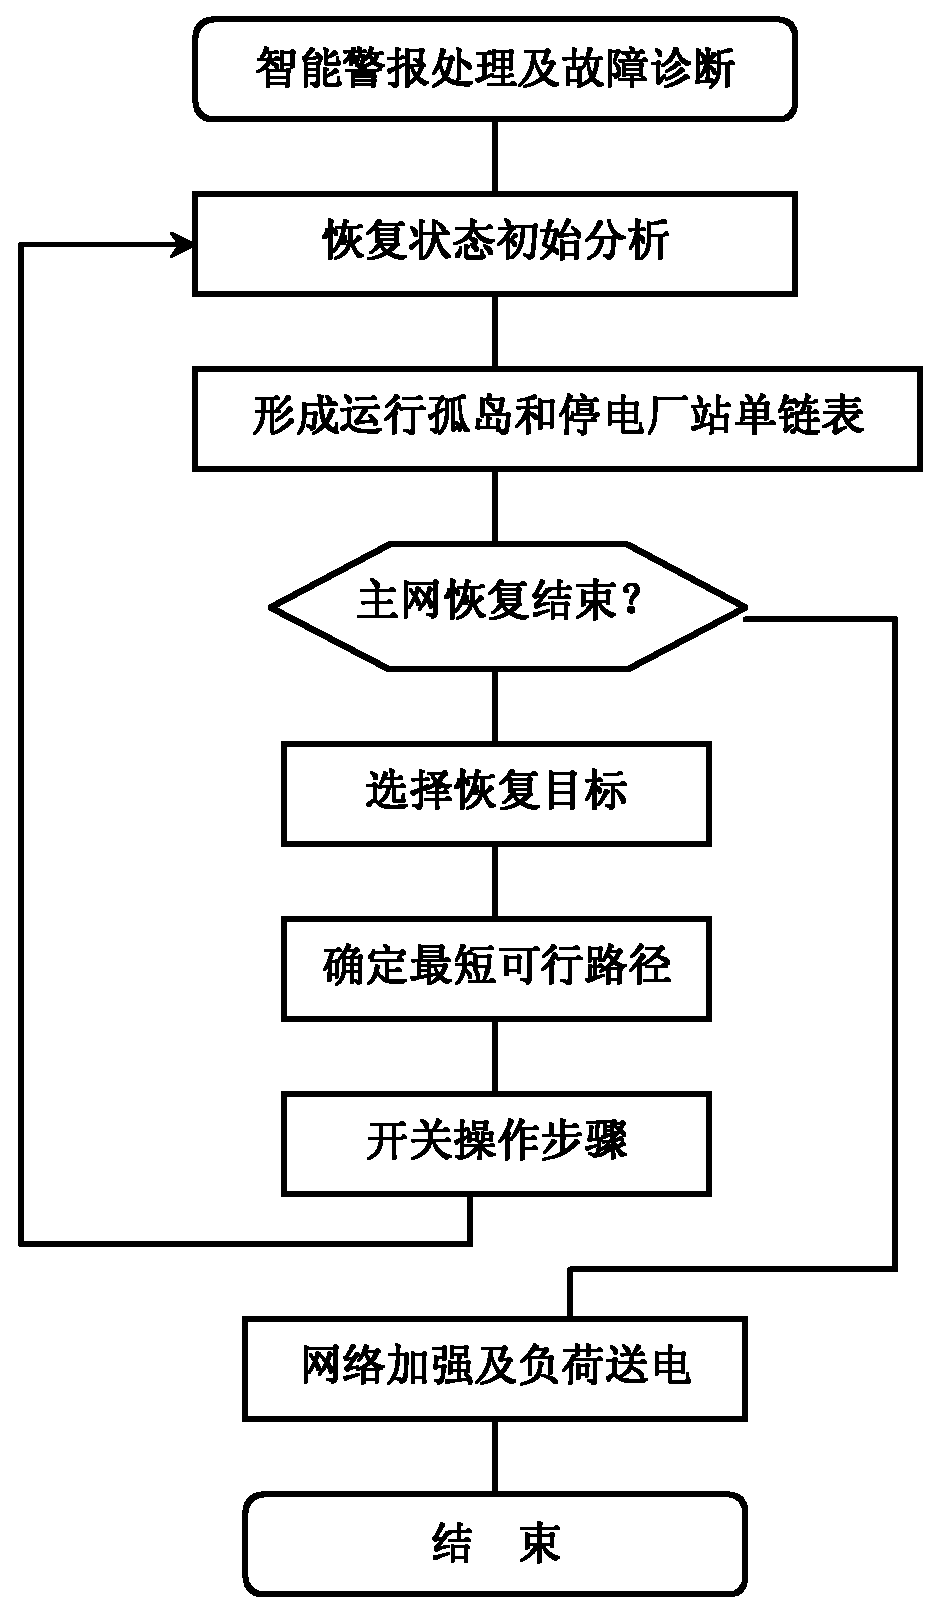 Method for controlling system recovery based on network reconfiguration